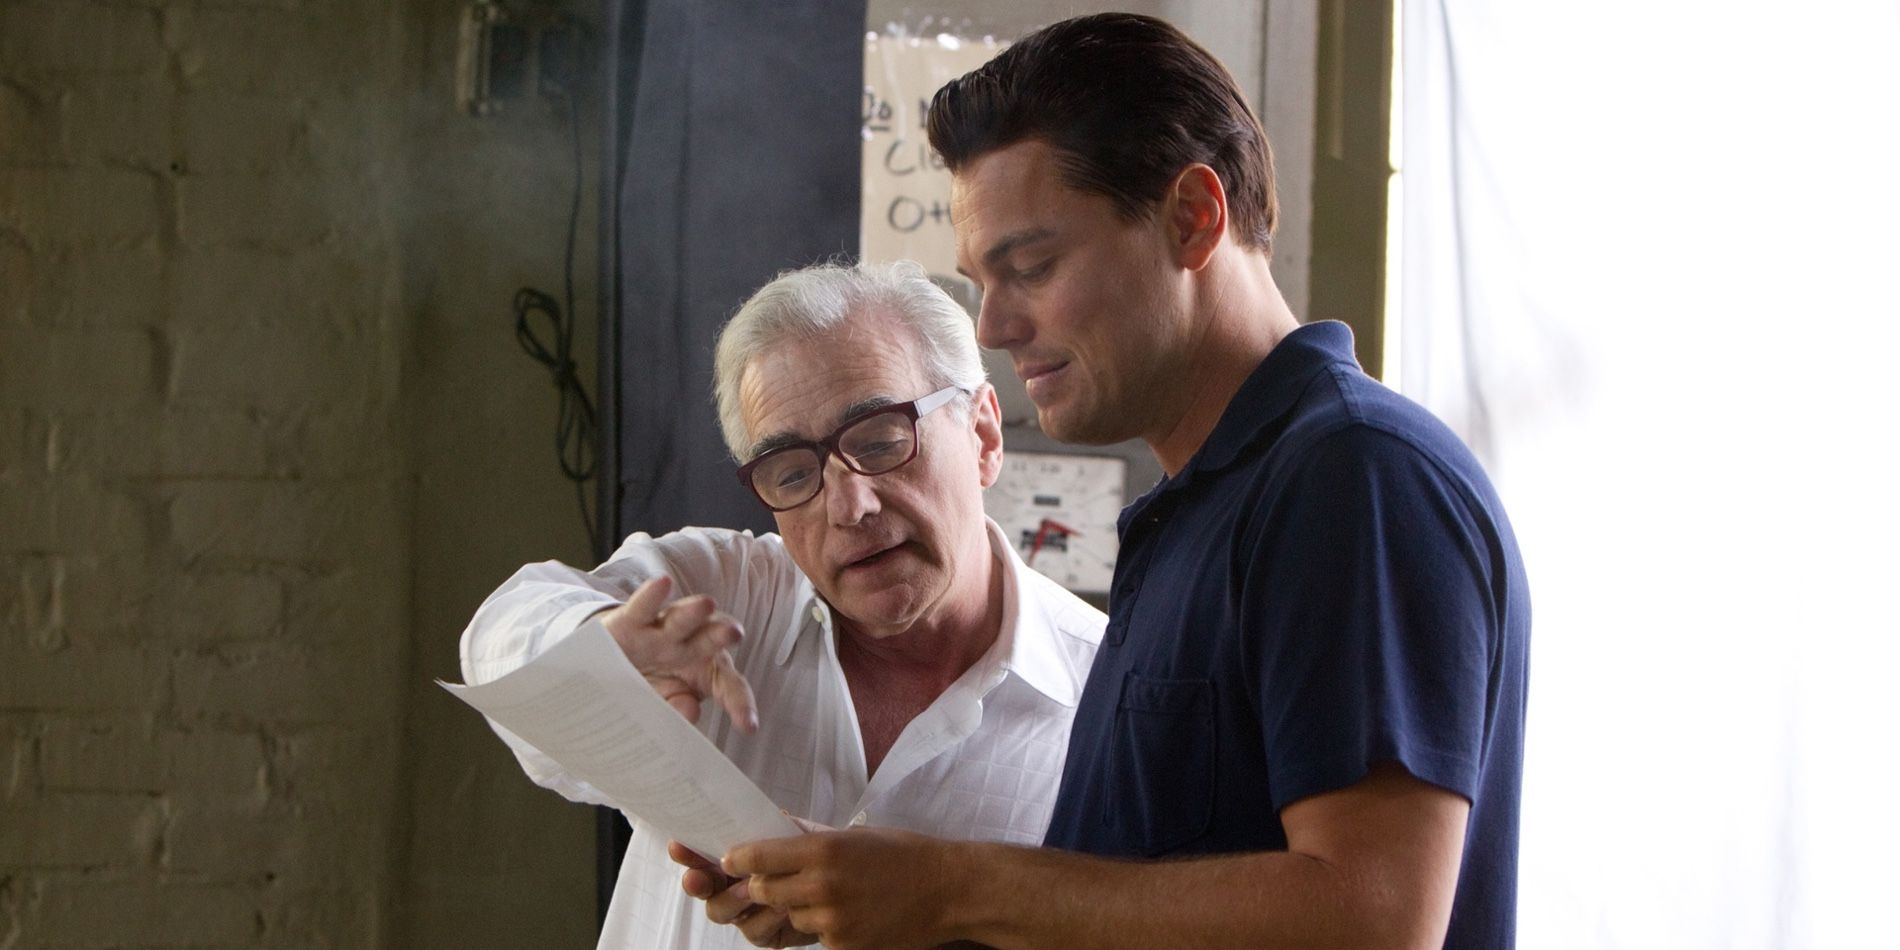 Martin Scorsese and Leonardo DiCaprio on The Wolf of Wall Street set